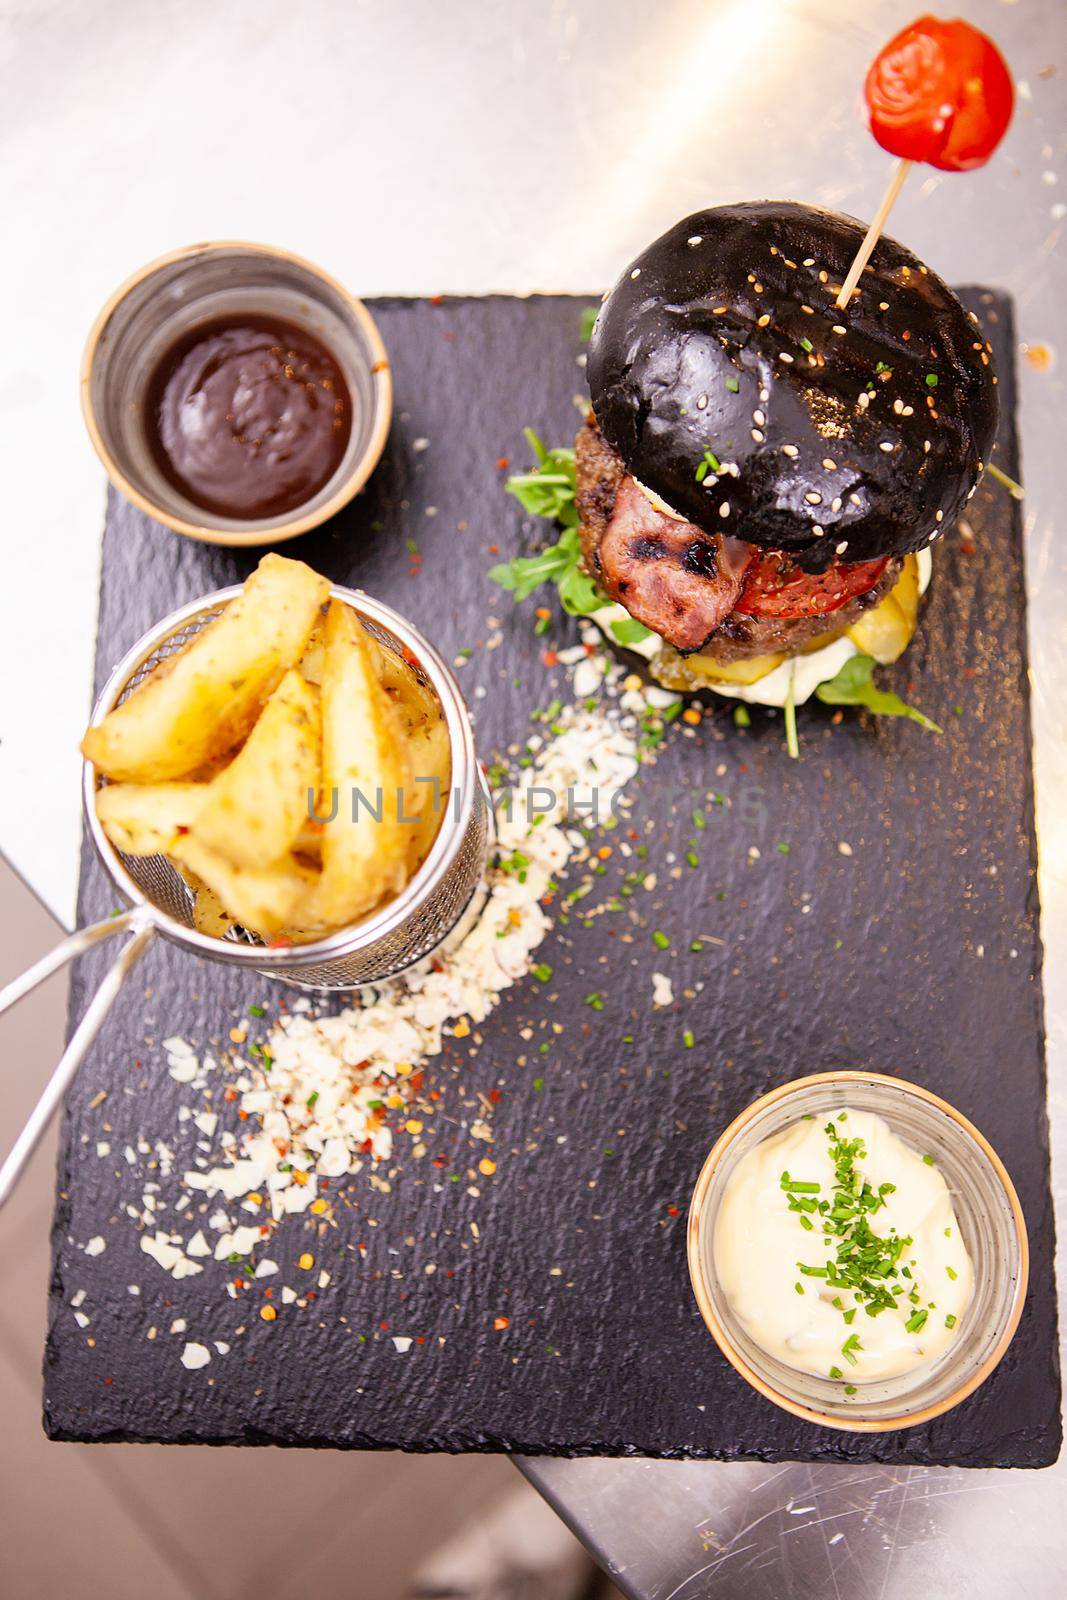 Black burger with french fries on stone cutting board.In kitchen restaurant